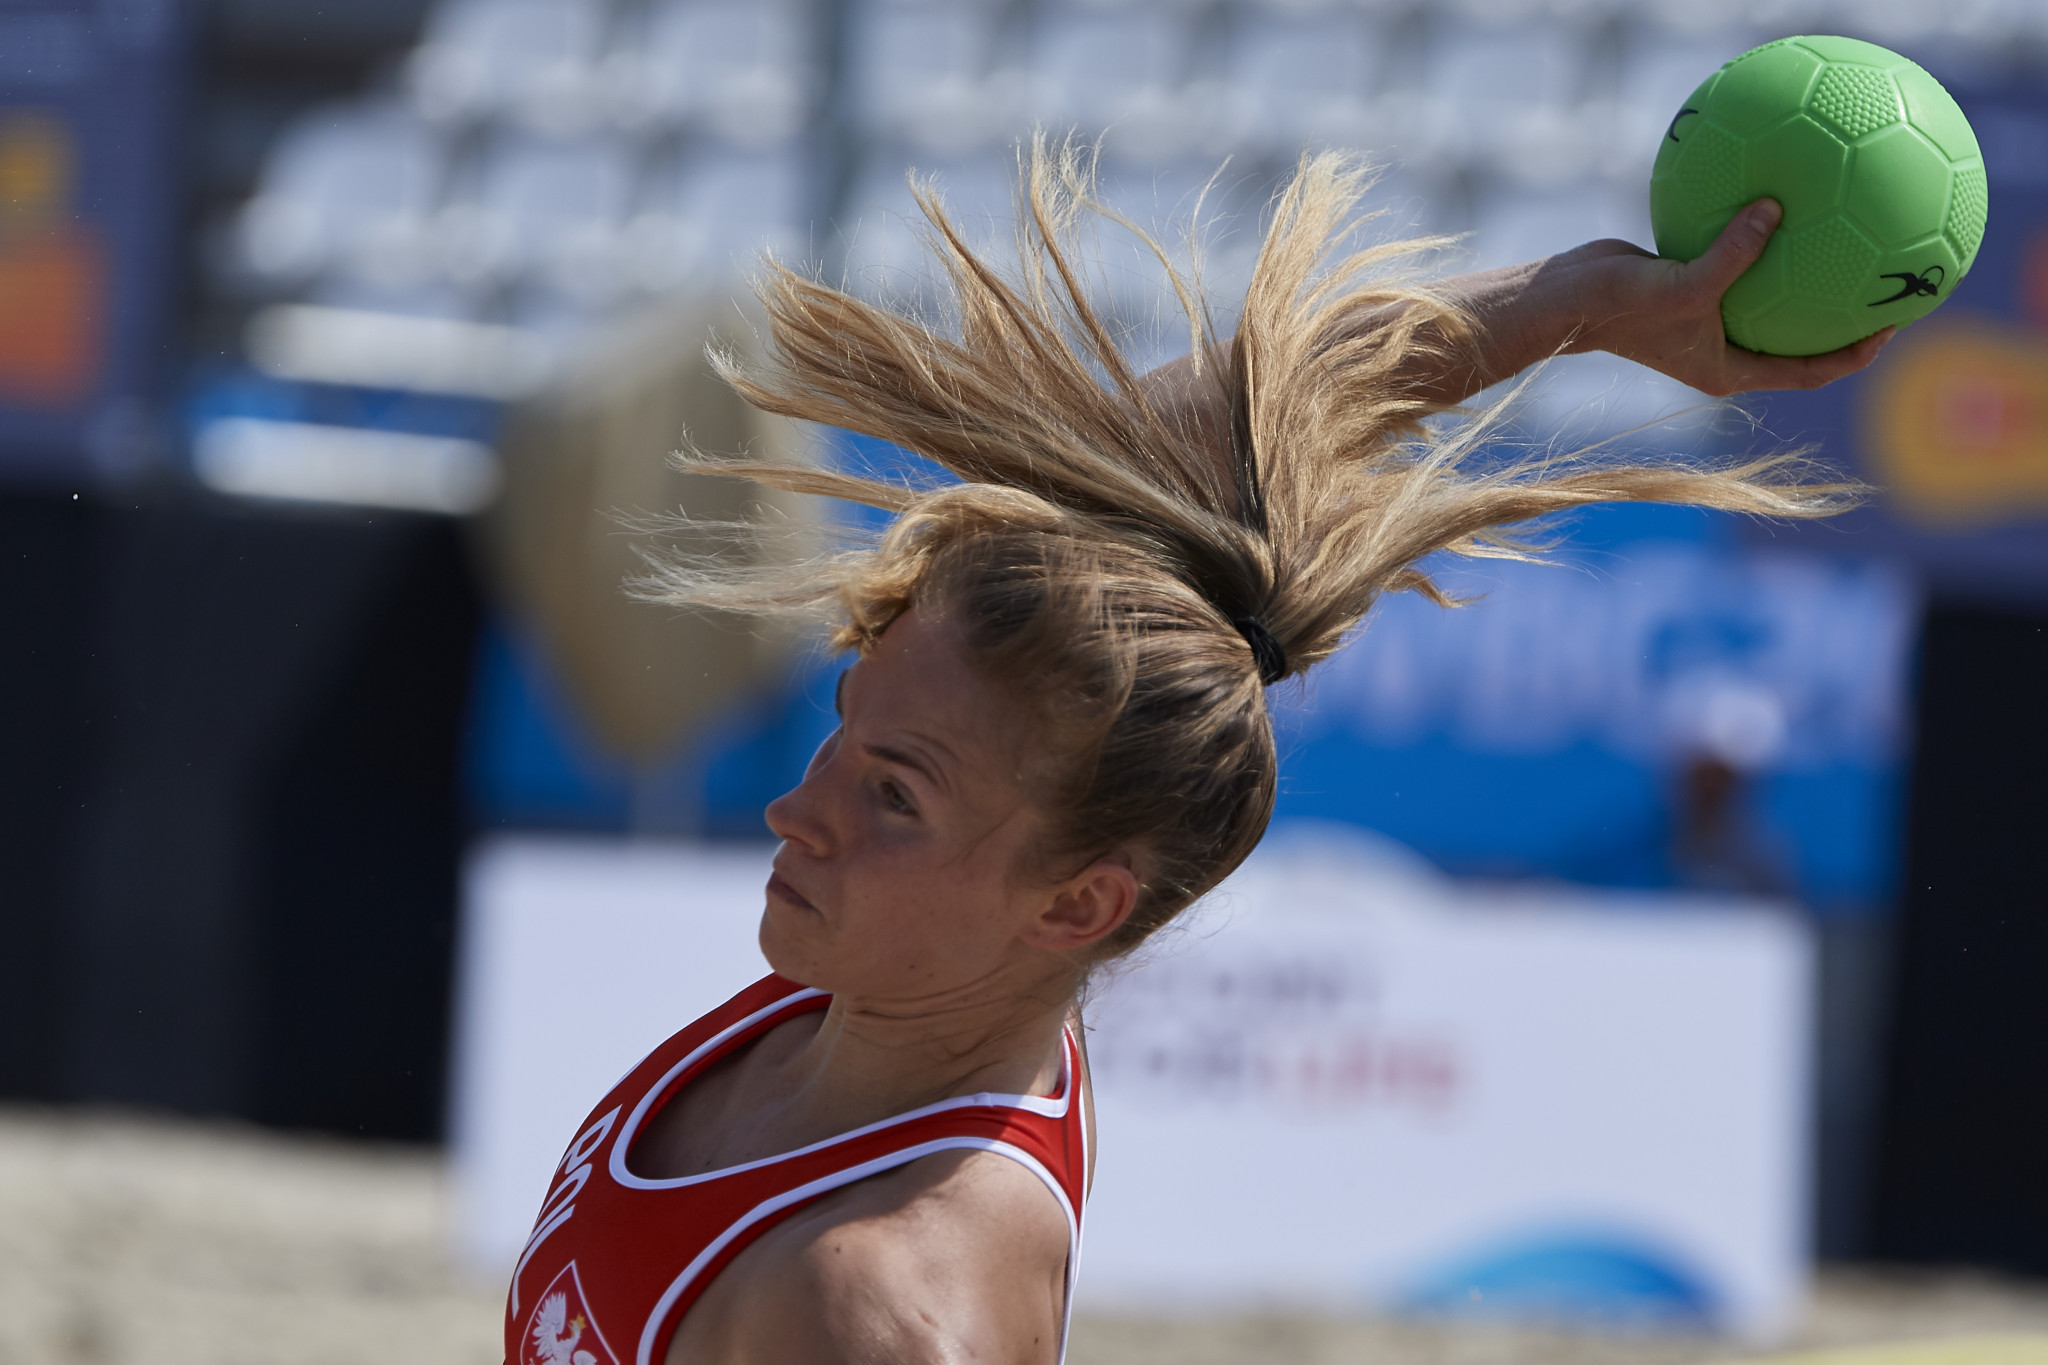 Beach handball competition has begun before the Opening Ceremony tomorrow ©ANOC World Beach Games